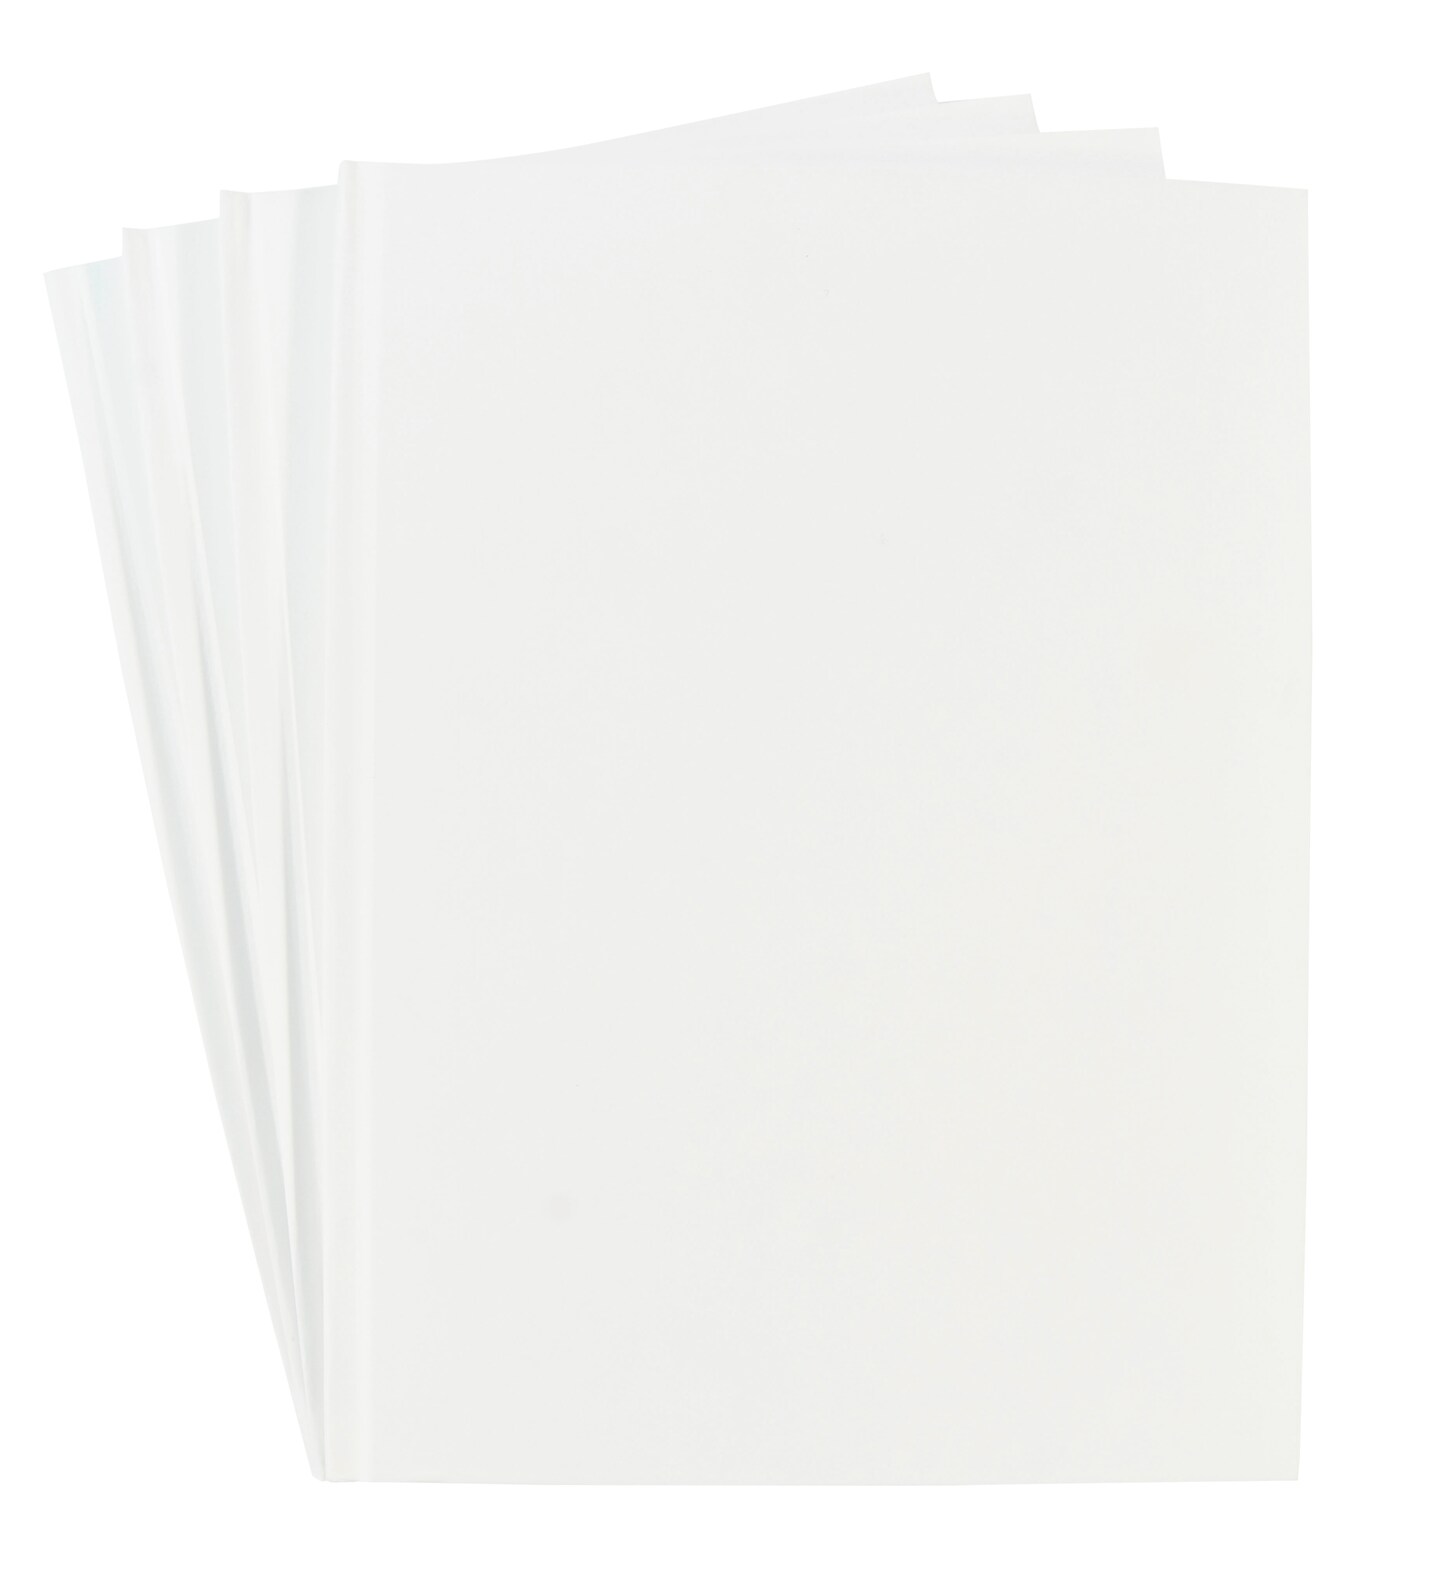 Sax Blanc Books Hardcover Sketchbook, 28 Sheets, Pack of 4